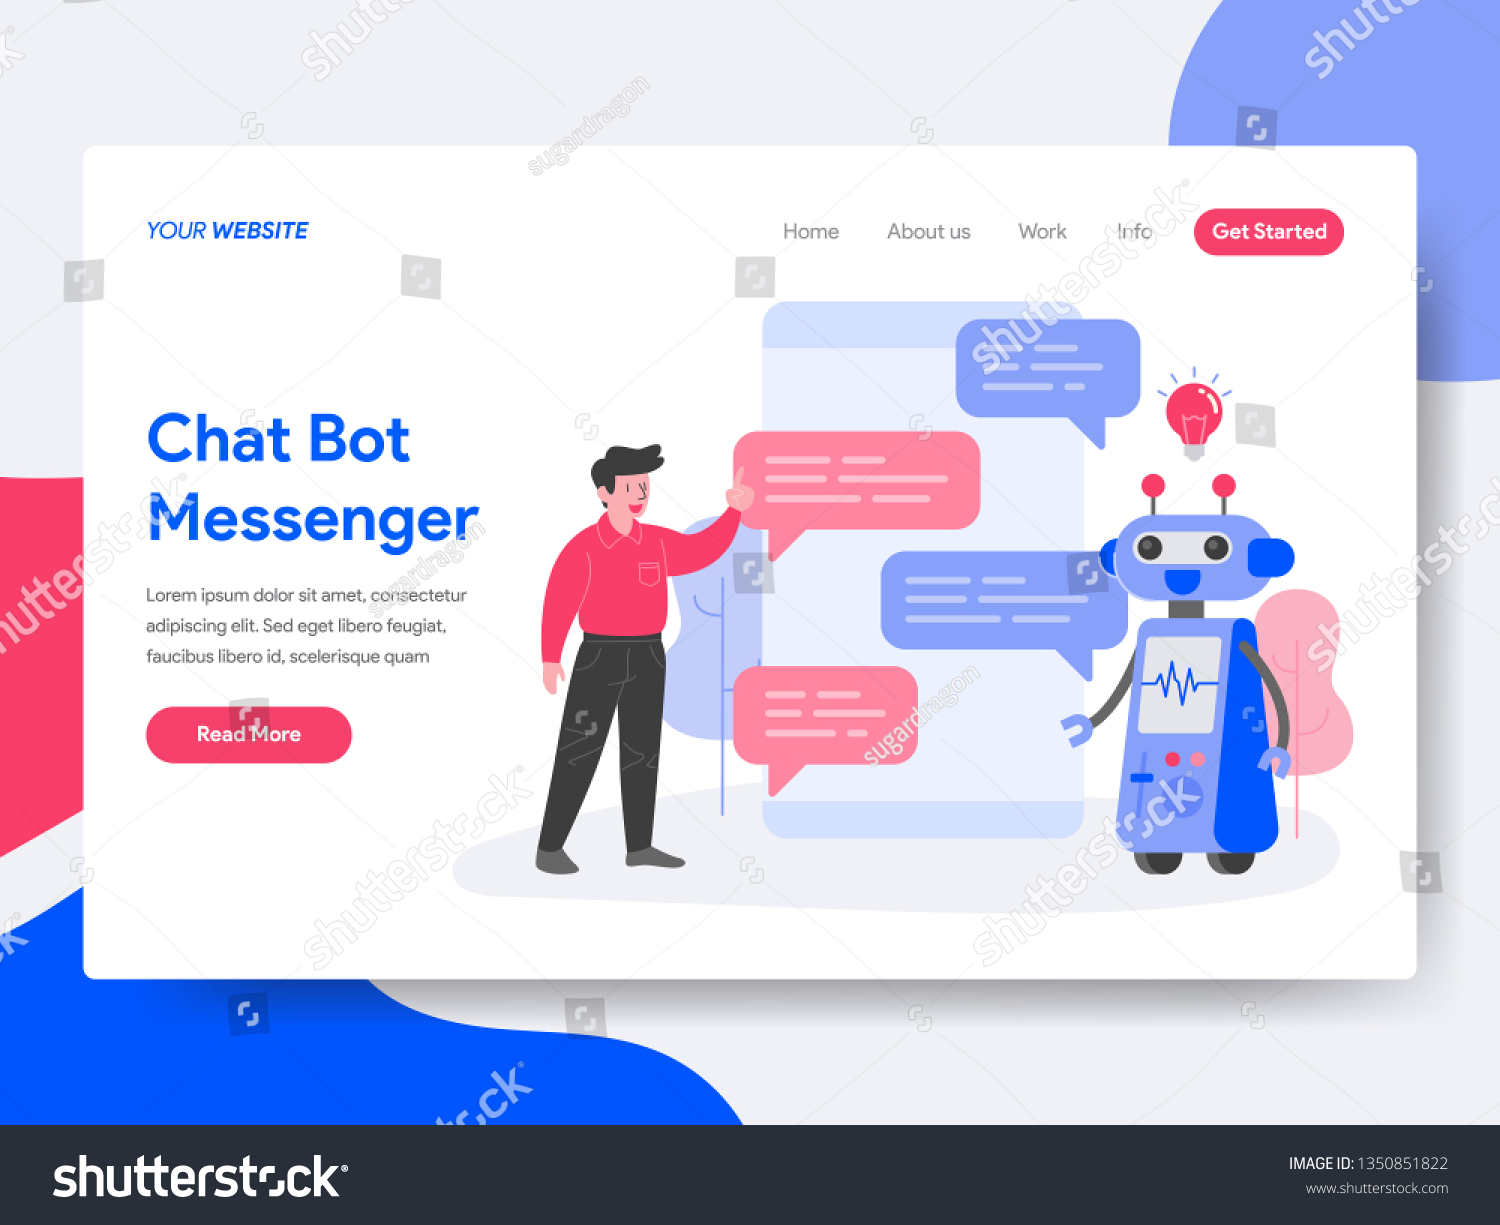 Messenger chat with bot The Complete